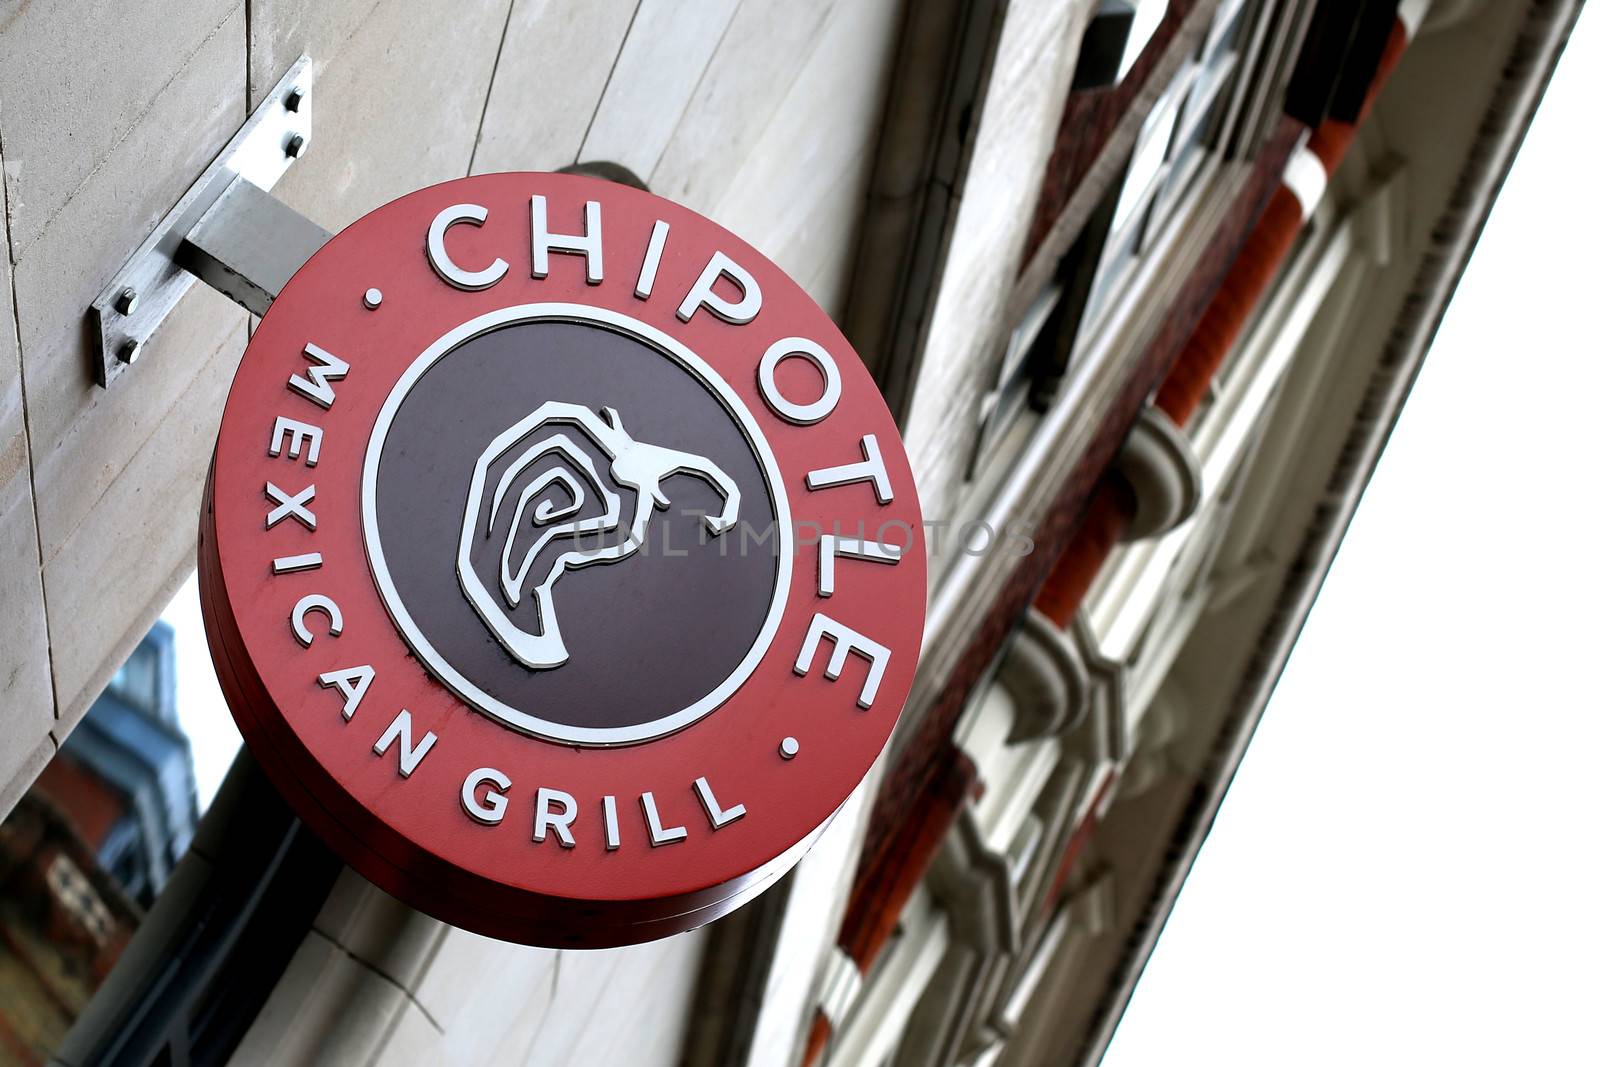 Chipotle Mexican Grill Shop Sign London by Whiteboxmedia